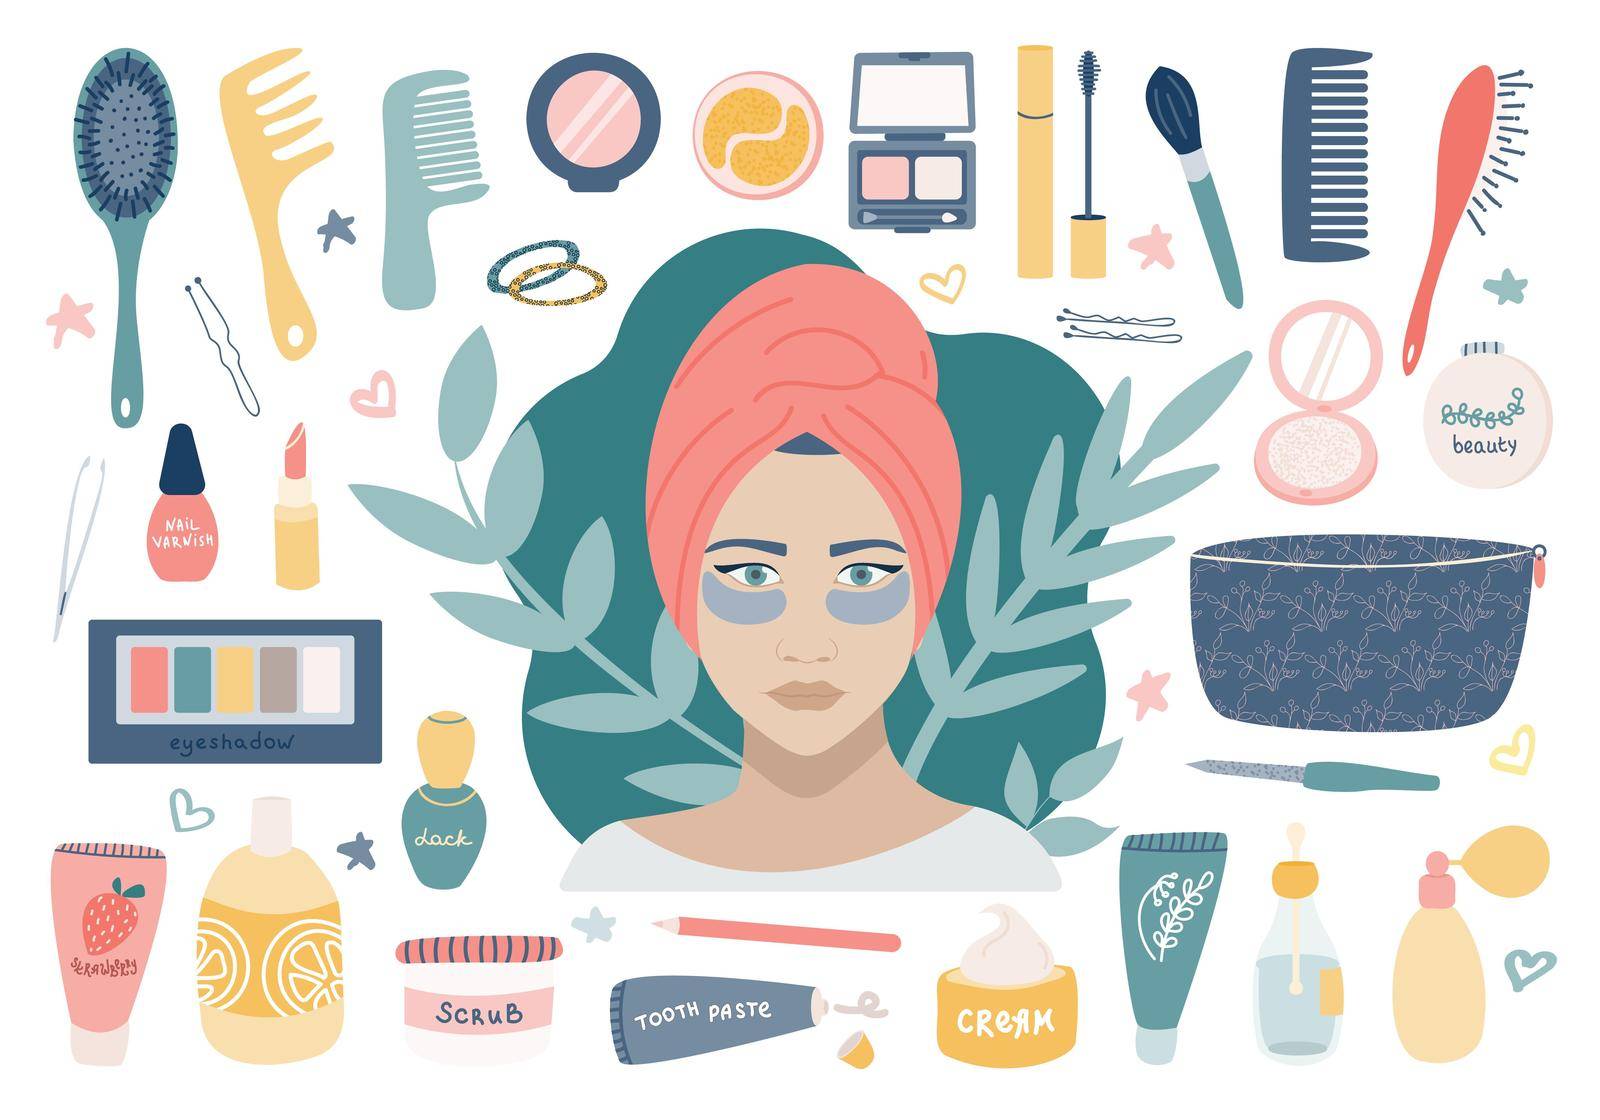 Large cosmetic set with grooming cosmetics. A girl with patches under her eyes, a makeup bag and its contents. Vector image on a white background by vetriciya_art